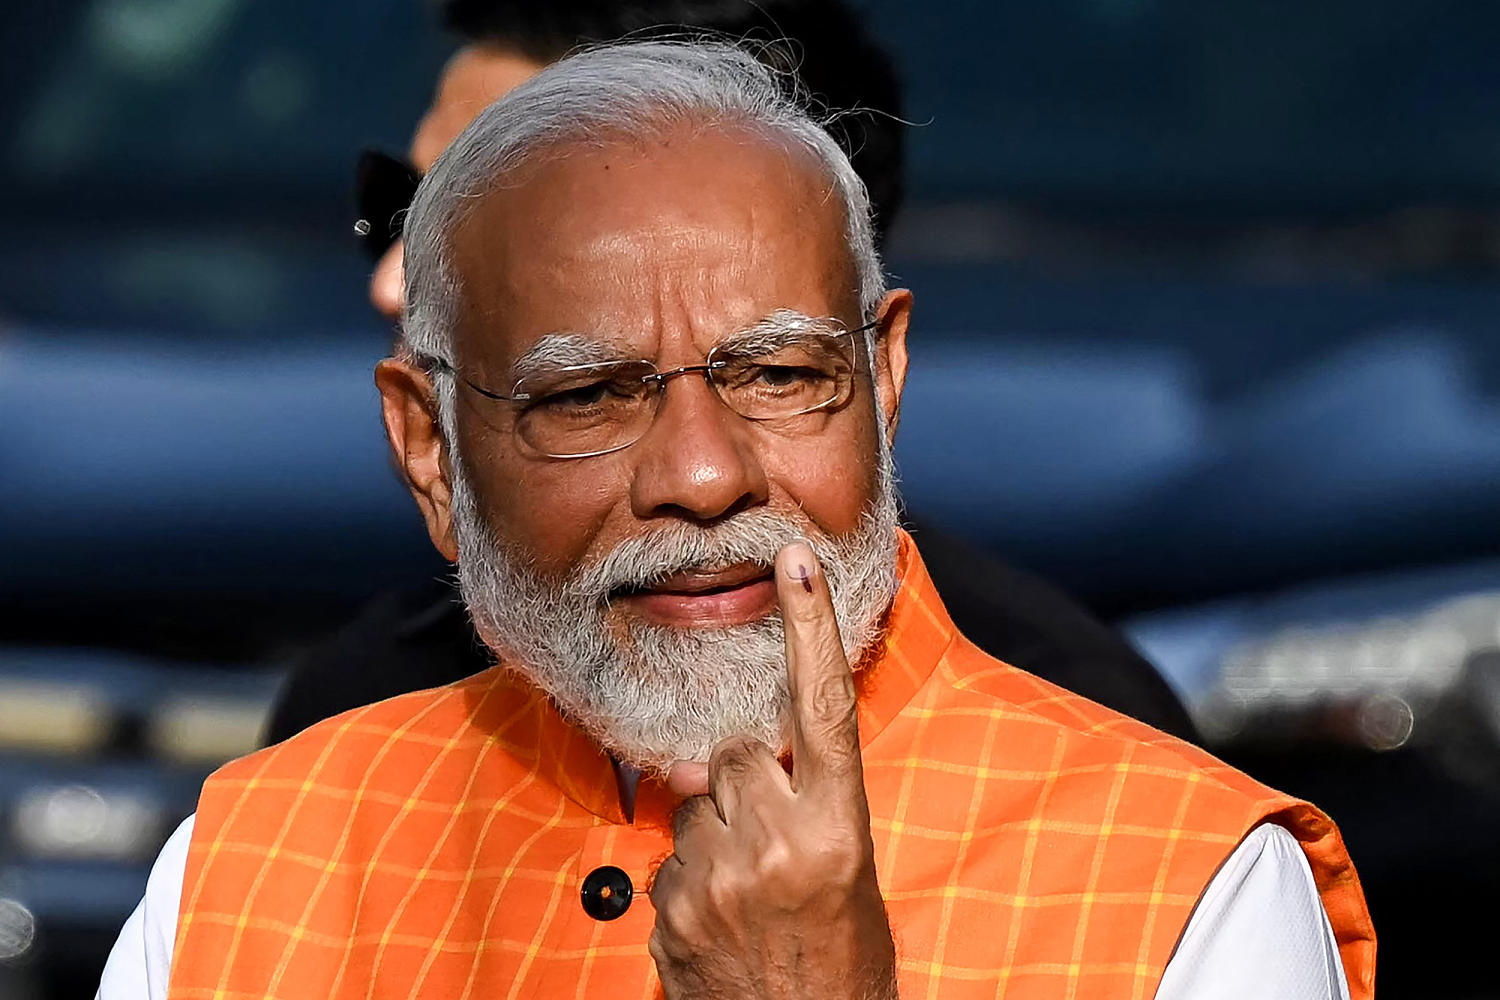 India's Prime Minister Narendra Modi casts his vote as giant election reaches half-way mark